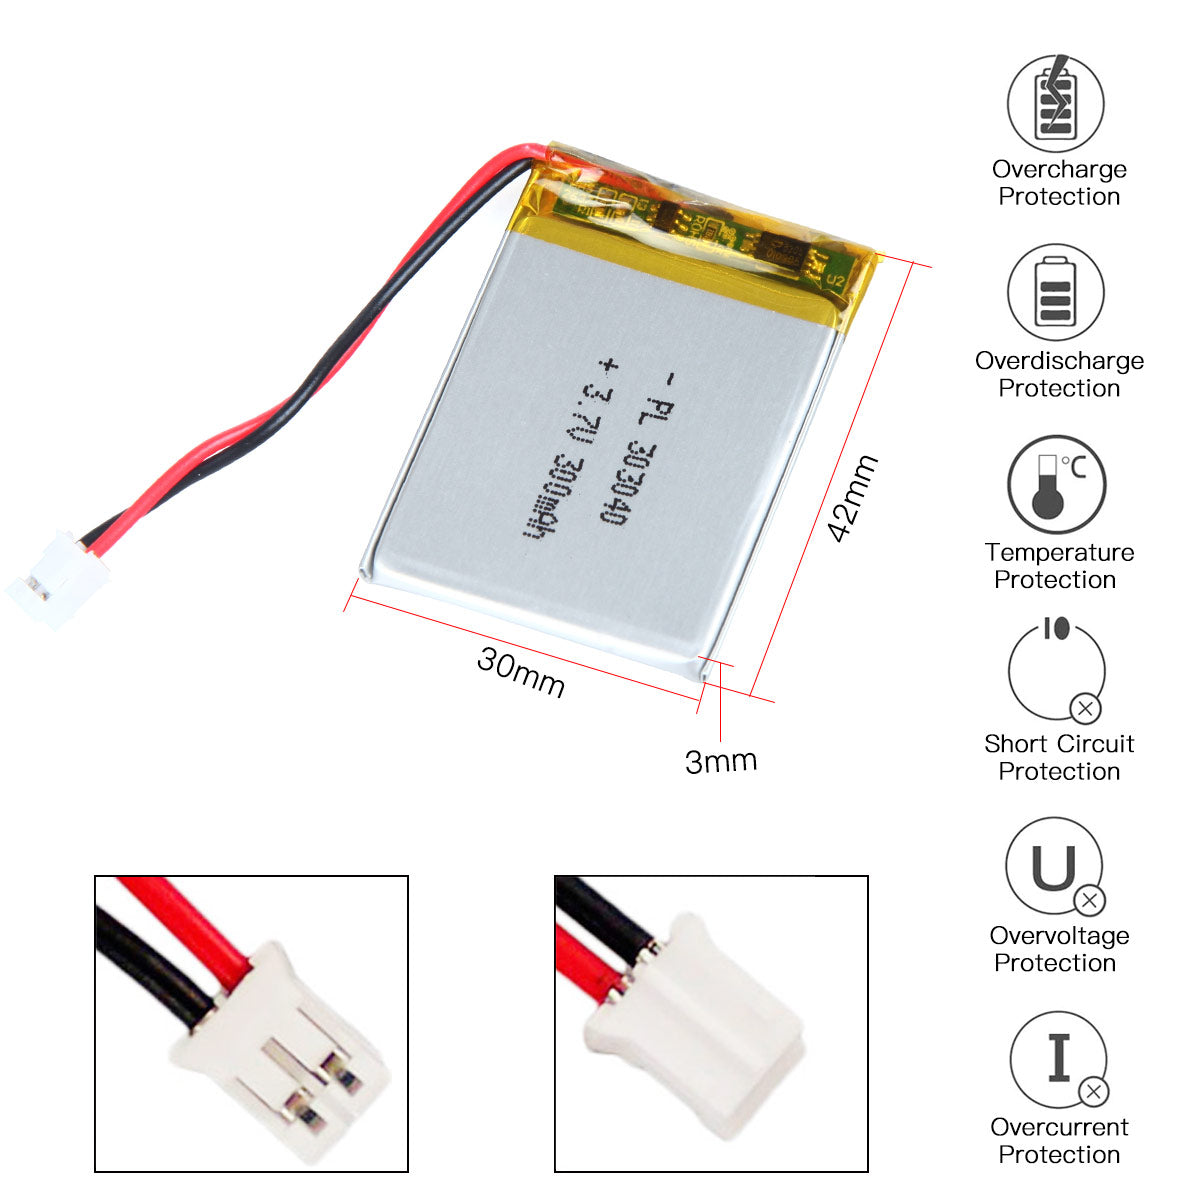 YDL 3.7V 300mAh 303040 Rechargeable Lipo Battery with JST Connector - YDL Battery